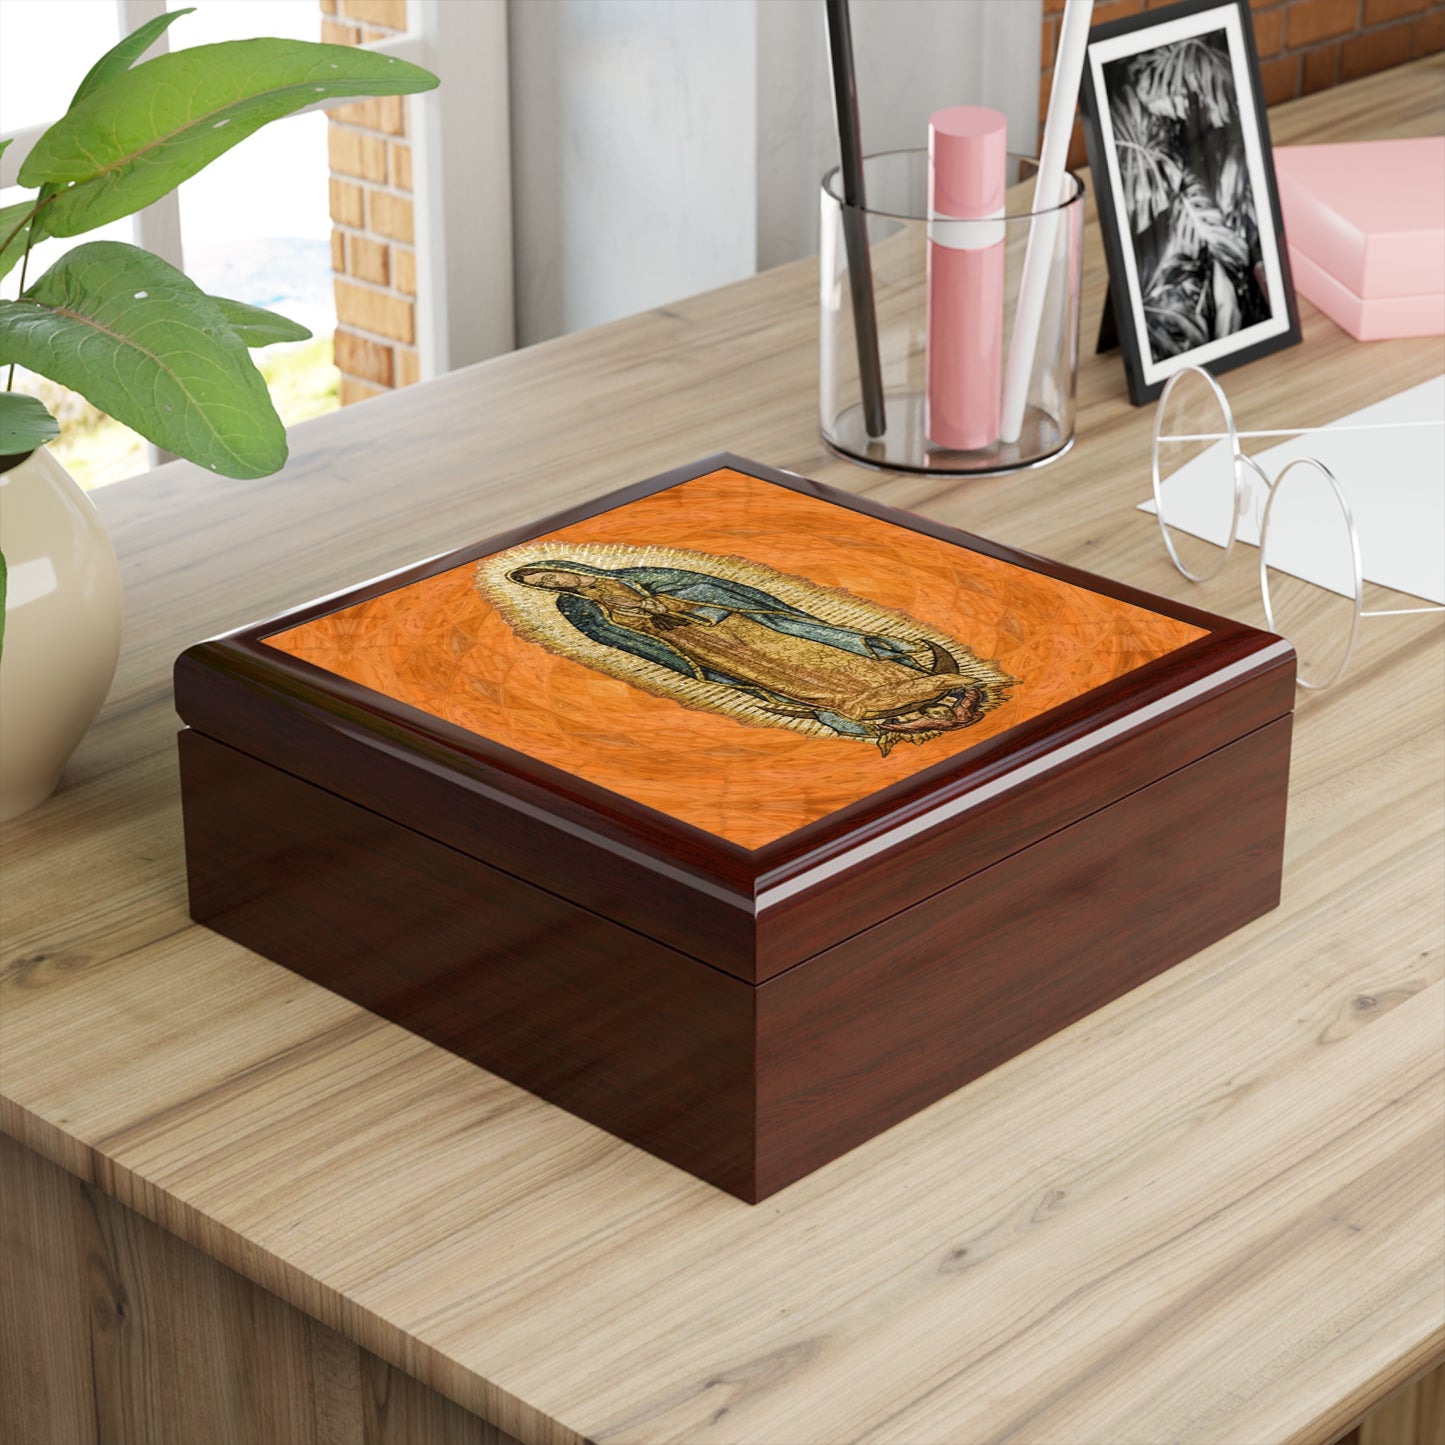 Our Lady of Guadalupe #ReliquaryBox #JewelryBox